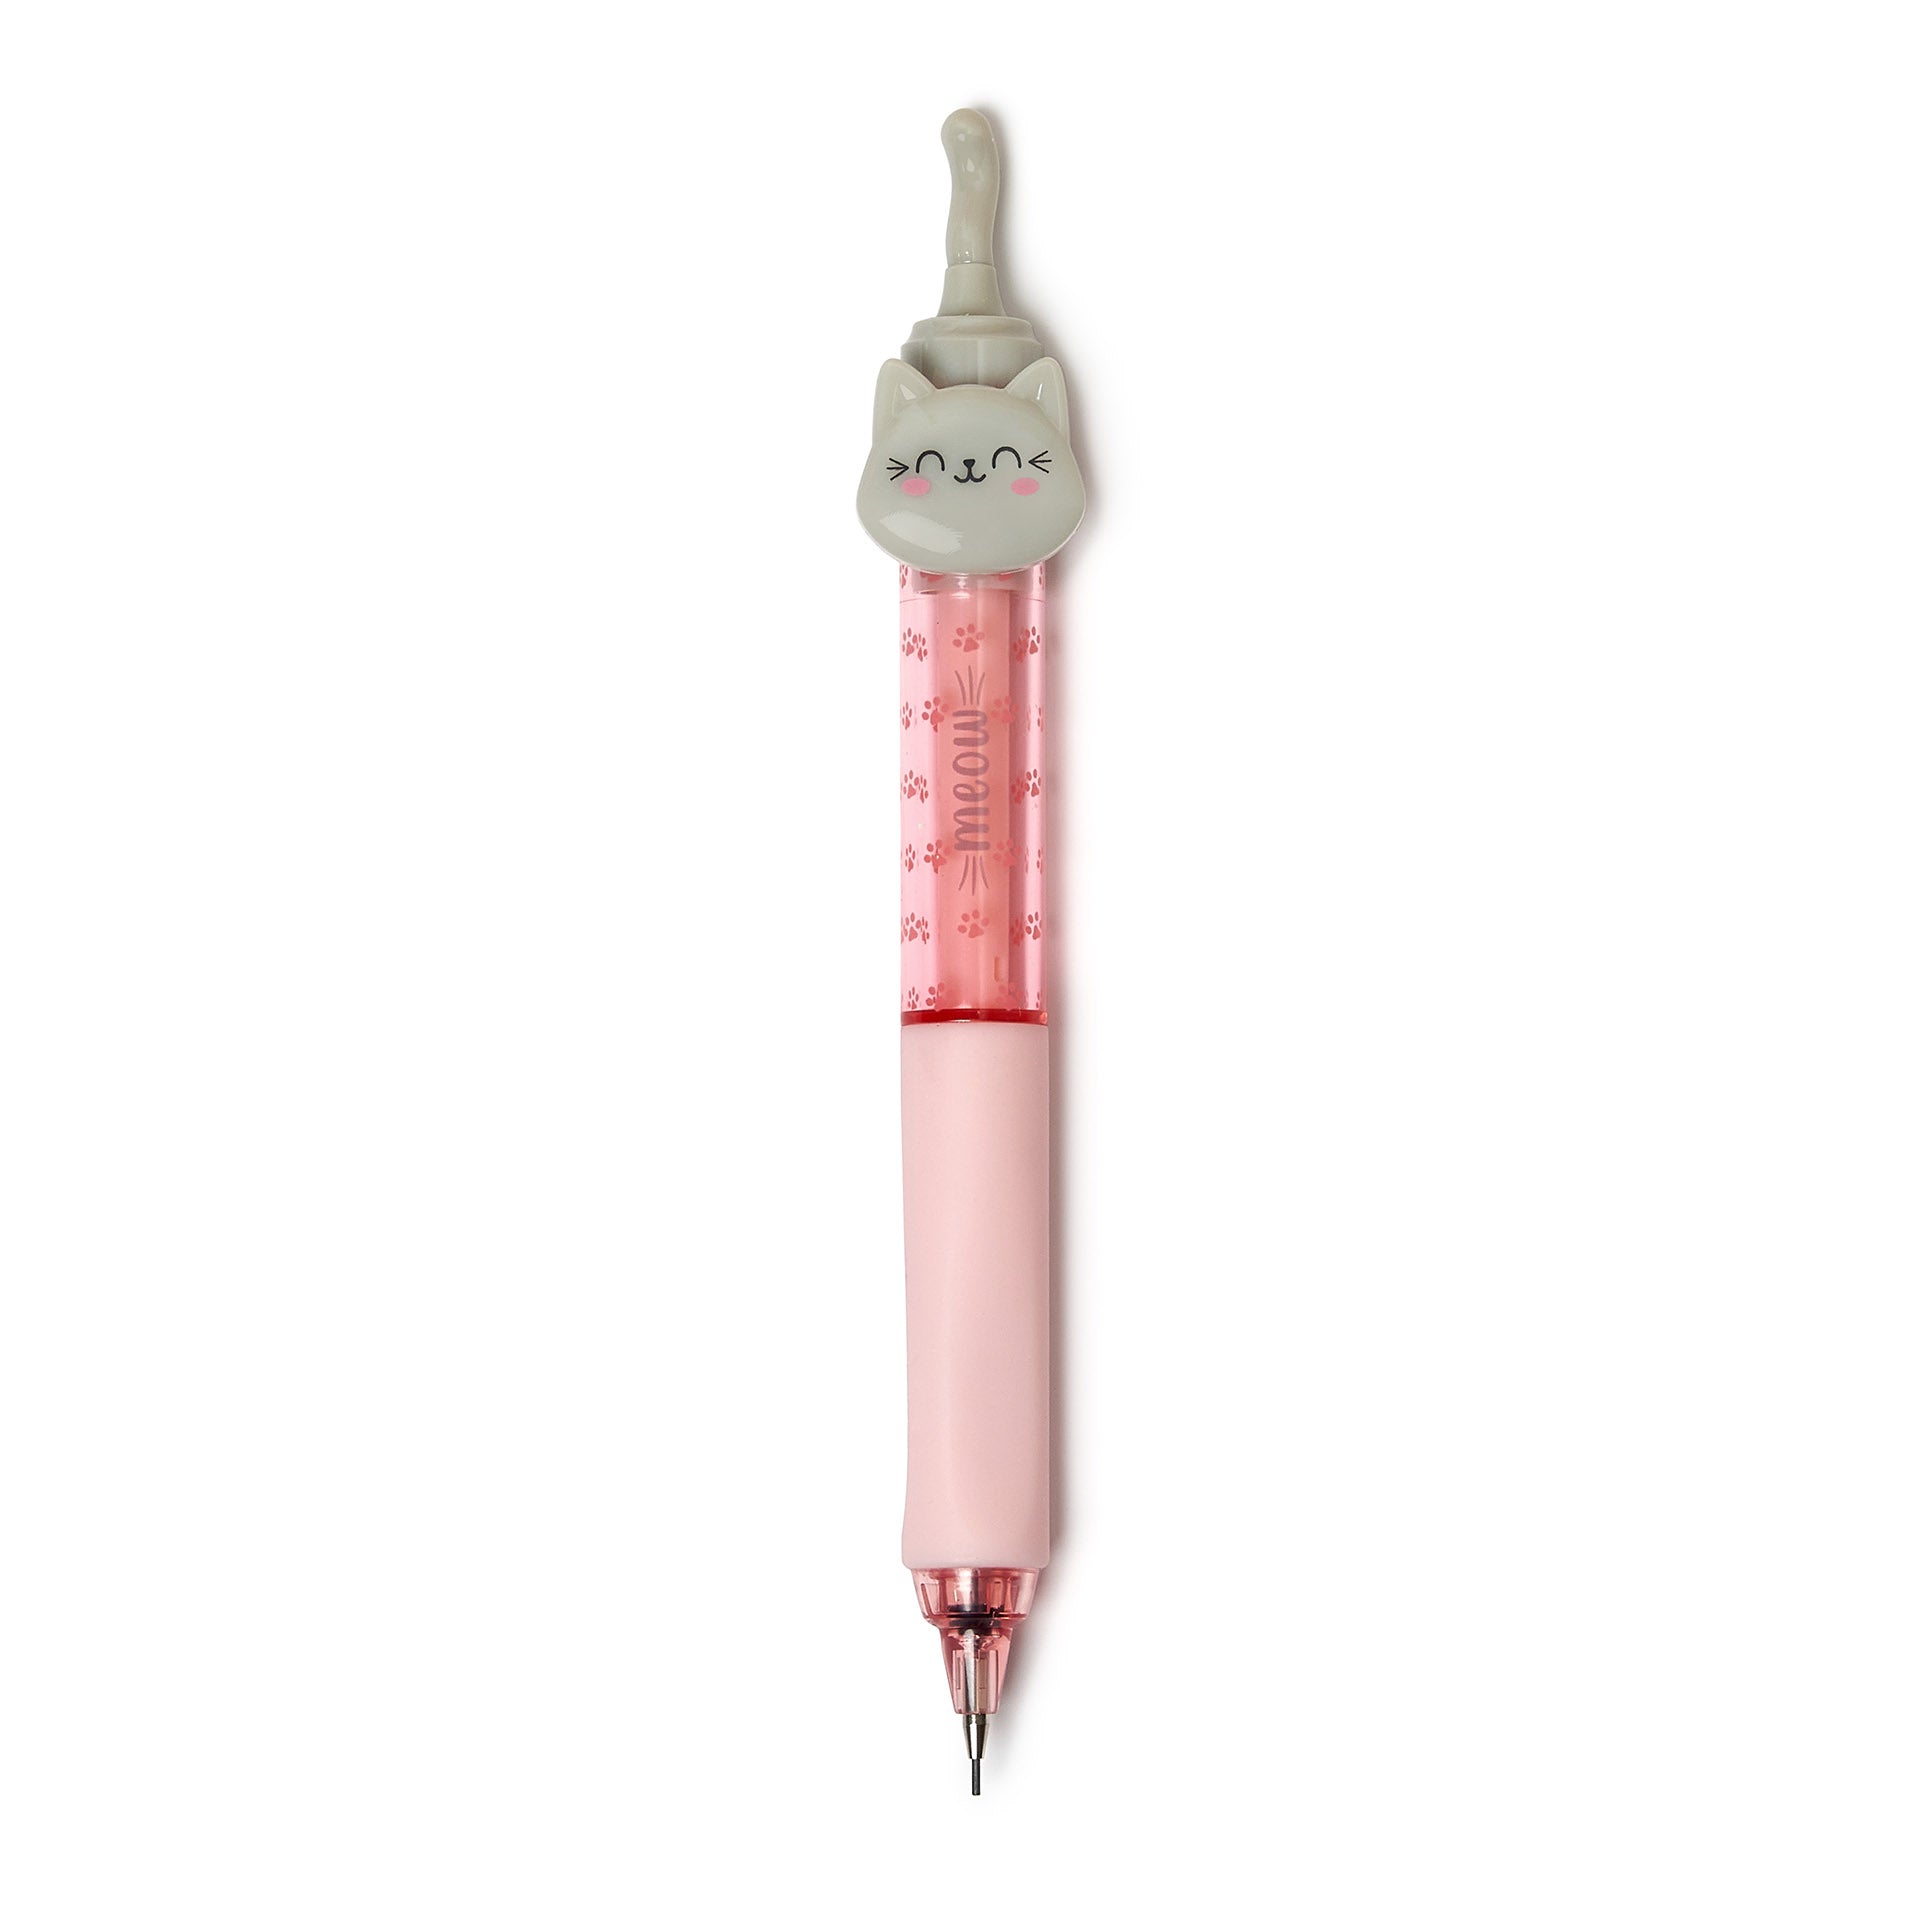 An image of a mechanical pencil with a light pink shaft. It has a clear section showing the lead and a silicone part for comfort. It also has a light grey cat with it's tail sticking up at the top.